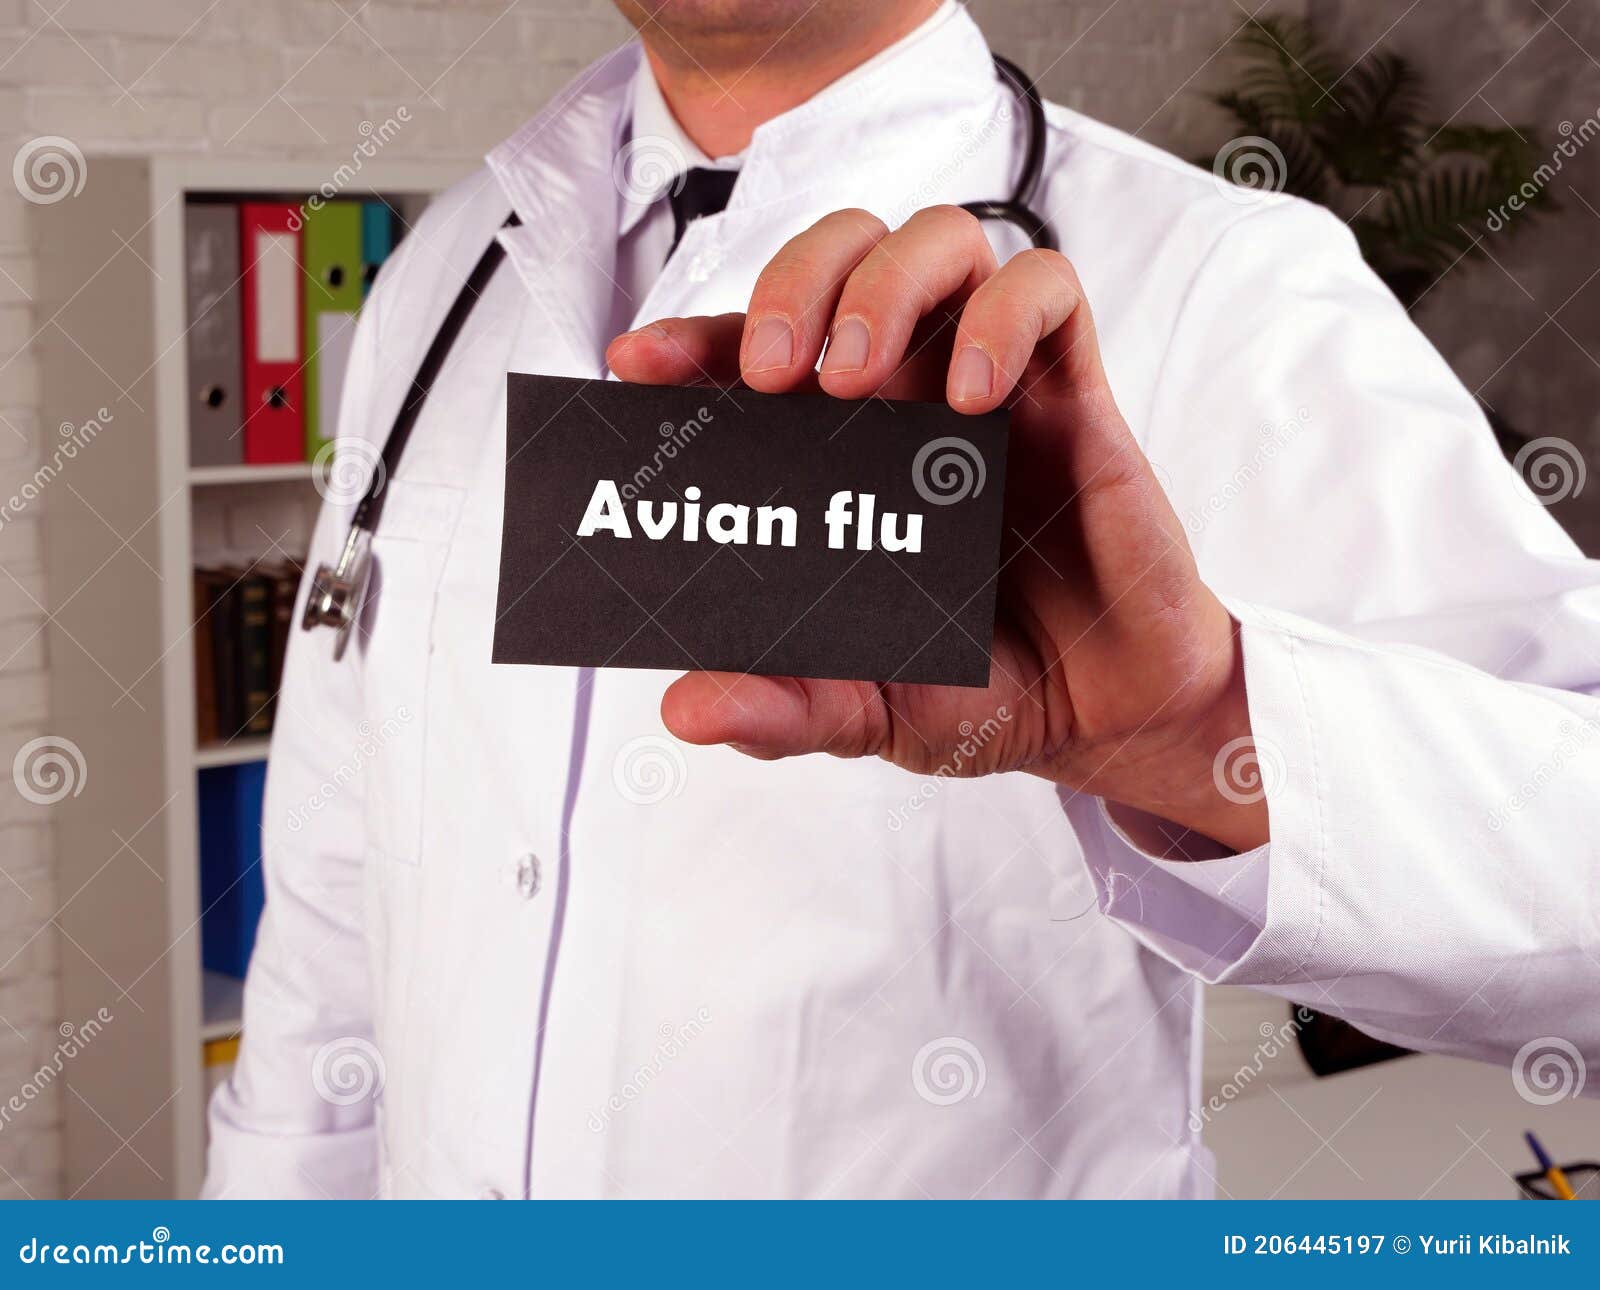 health care concept about avian flu with phrase on the page